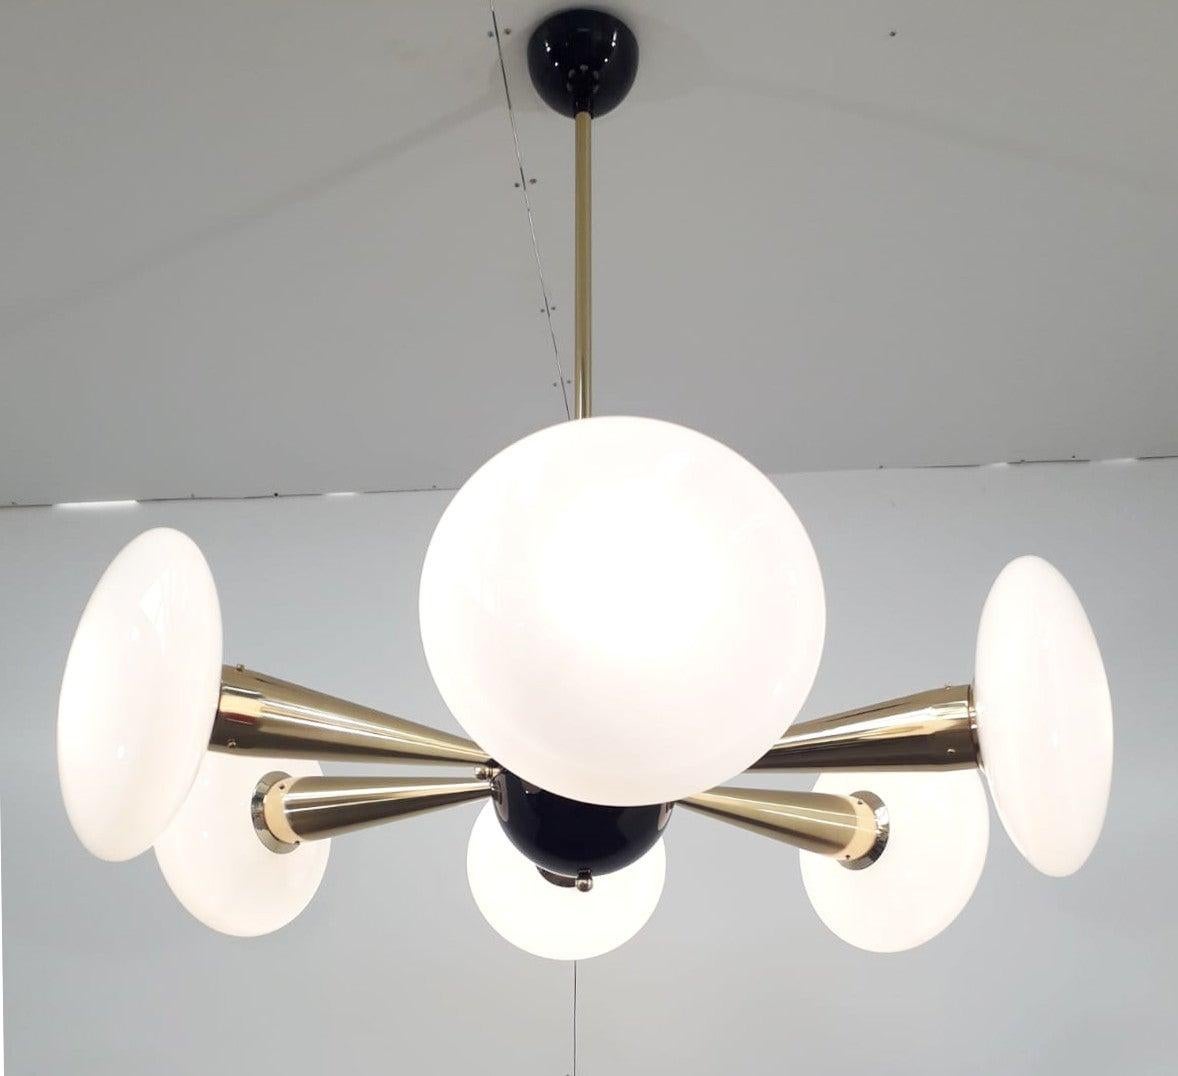 Italian chandelier with glossy white Murano glass shades mounted on polished brass frame with black enameled center and ceiling canopy / Designed by Fabio Bergomi for Fabio Ltd / Made in Italy
6 lights / E12 or E14 type / max 40W each
Measures: